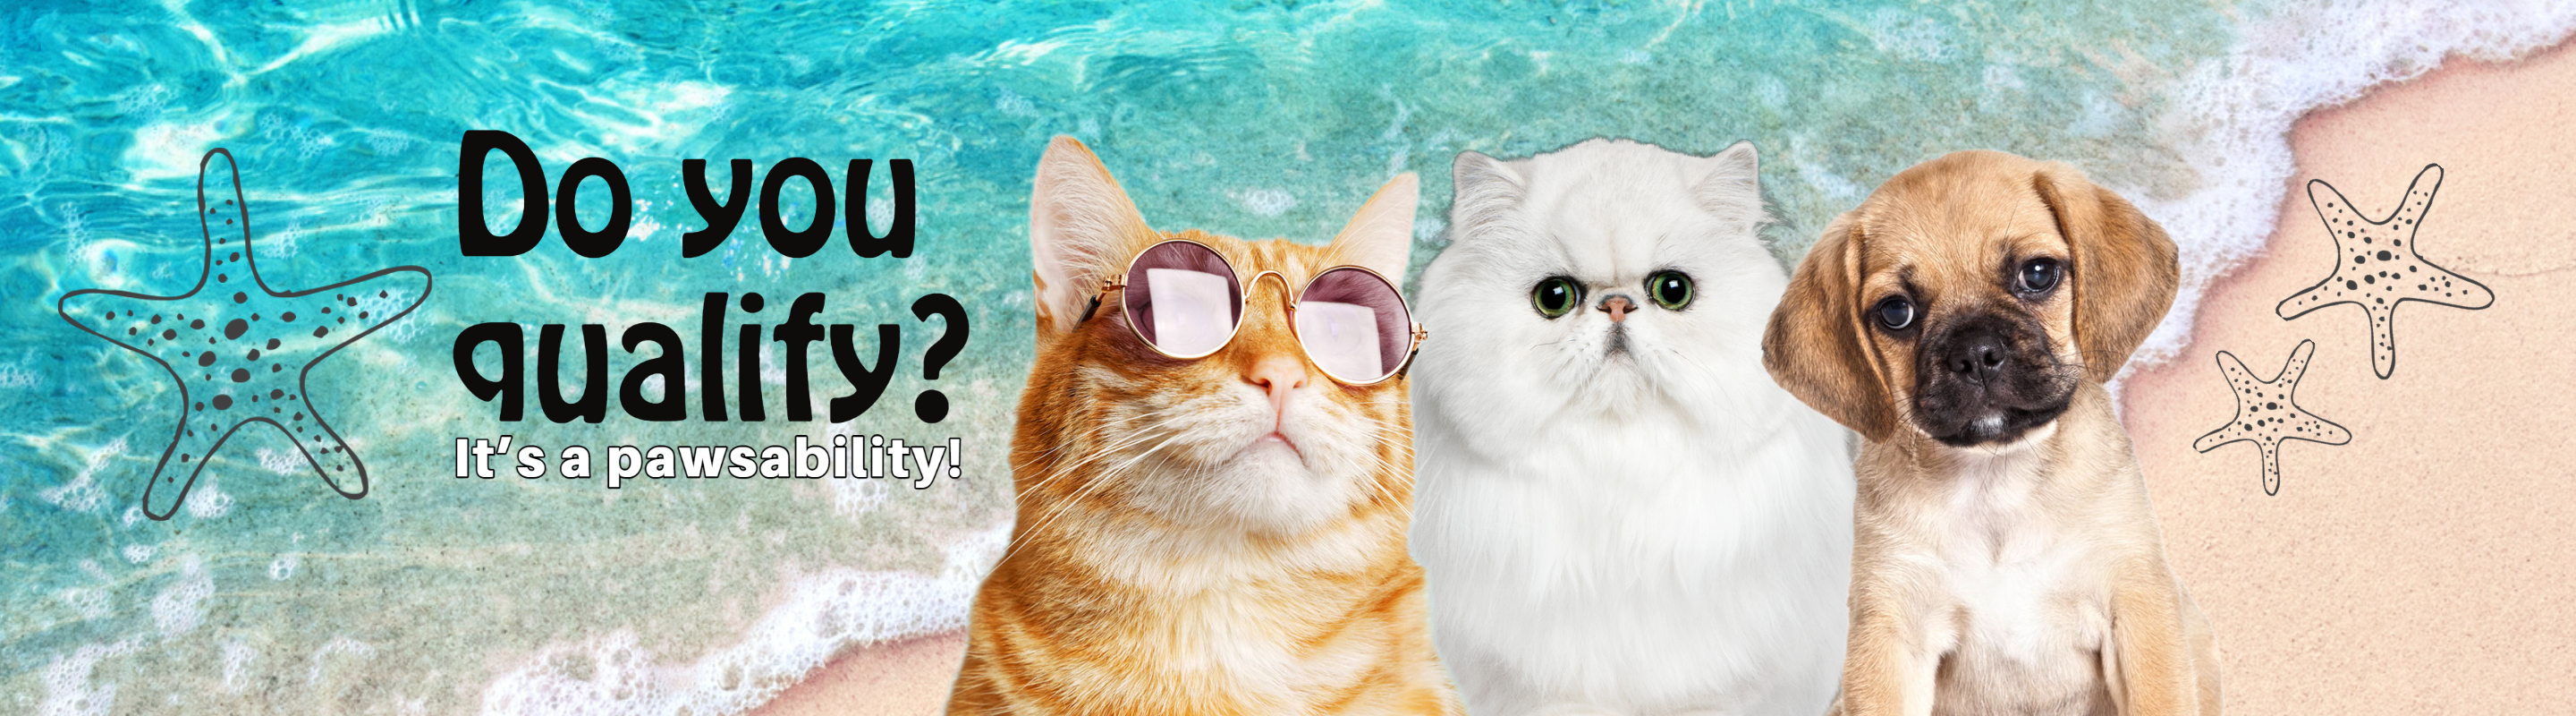 Photo of 2 cats, 1 dog at the beach, text that reads 'Do you qualify? It's a pawsability!'